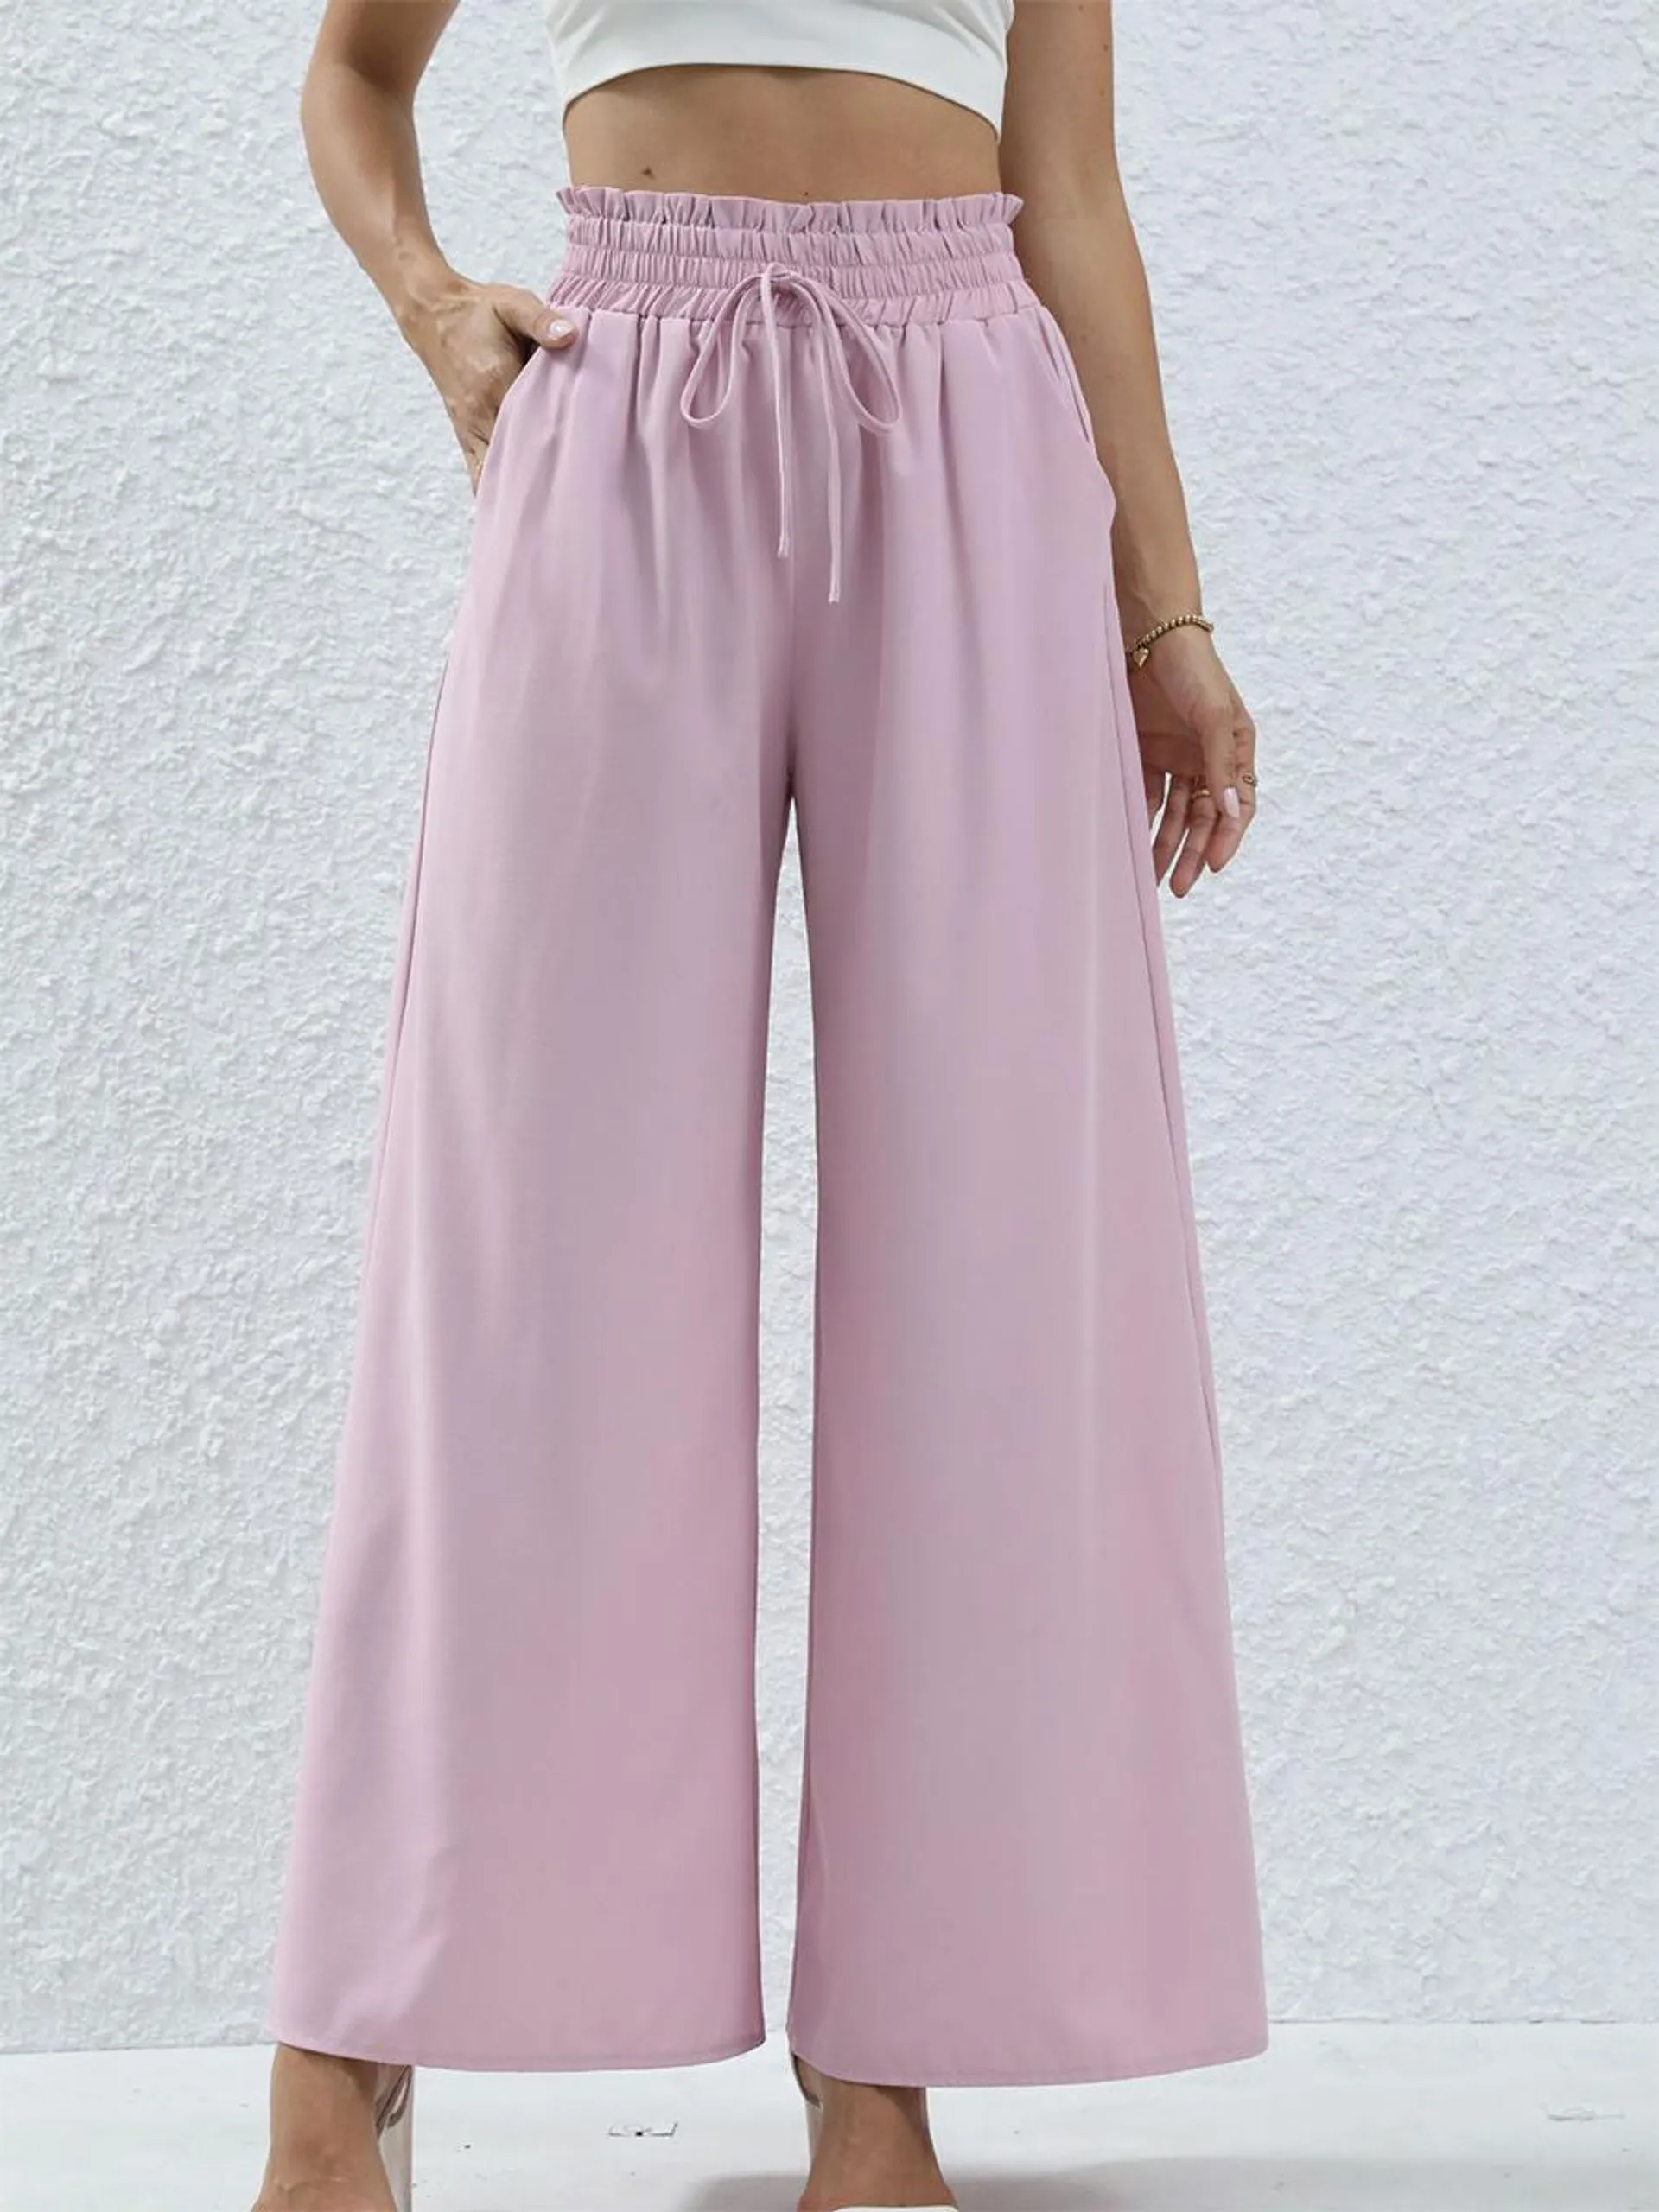 Pants Pink Lace Up Polyester Raised Waist Trousers